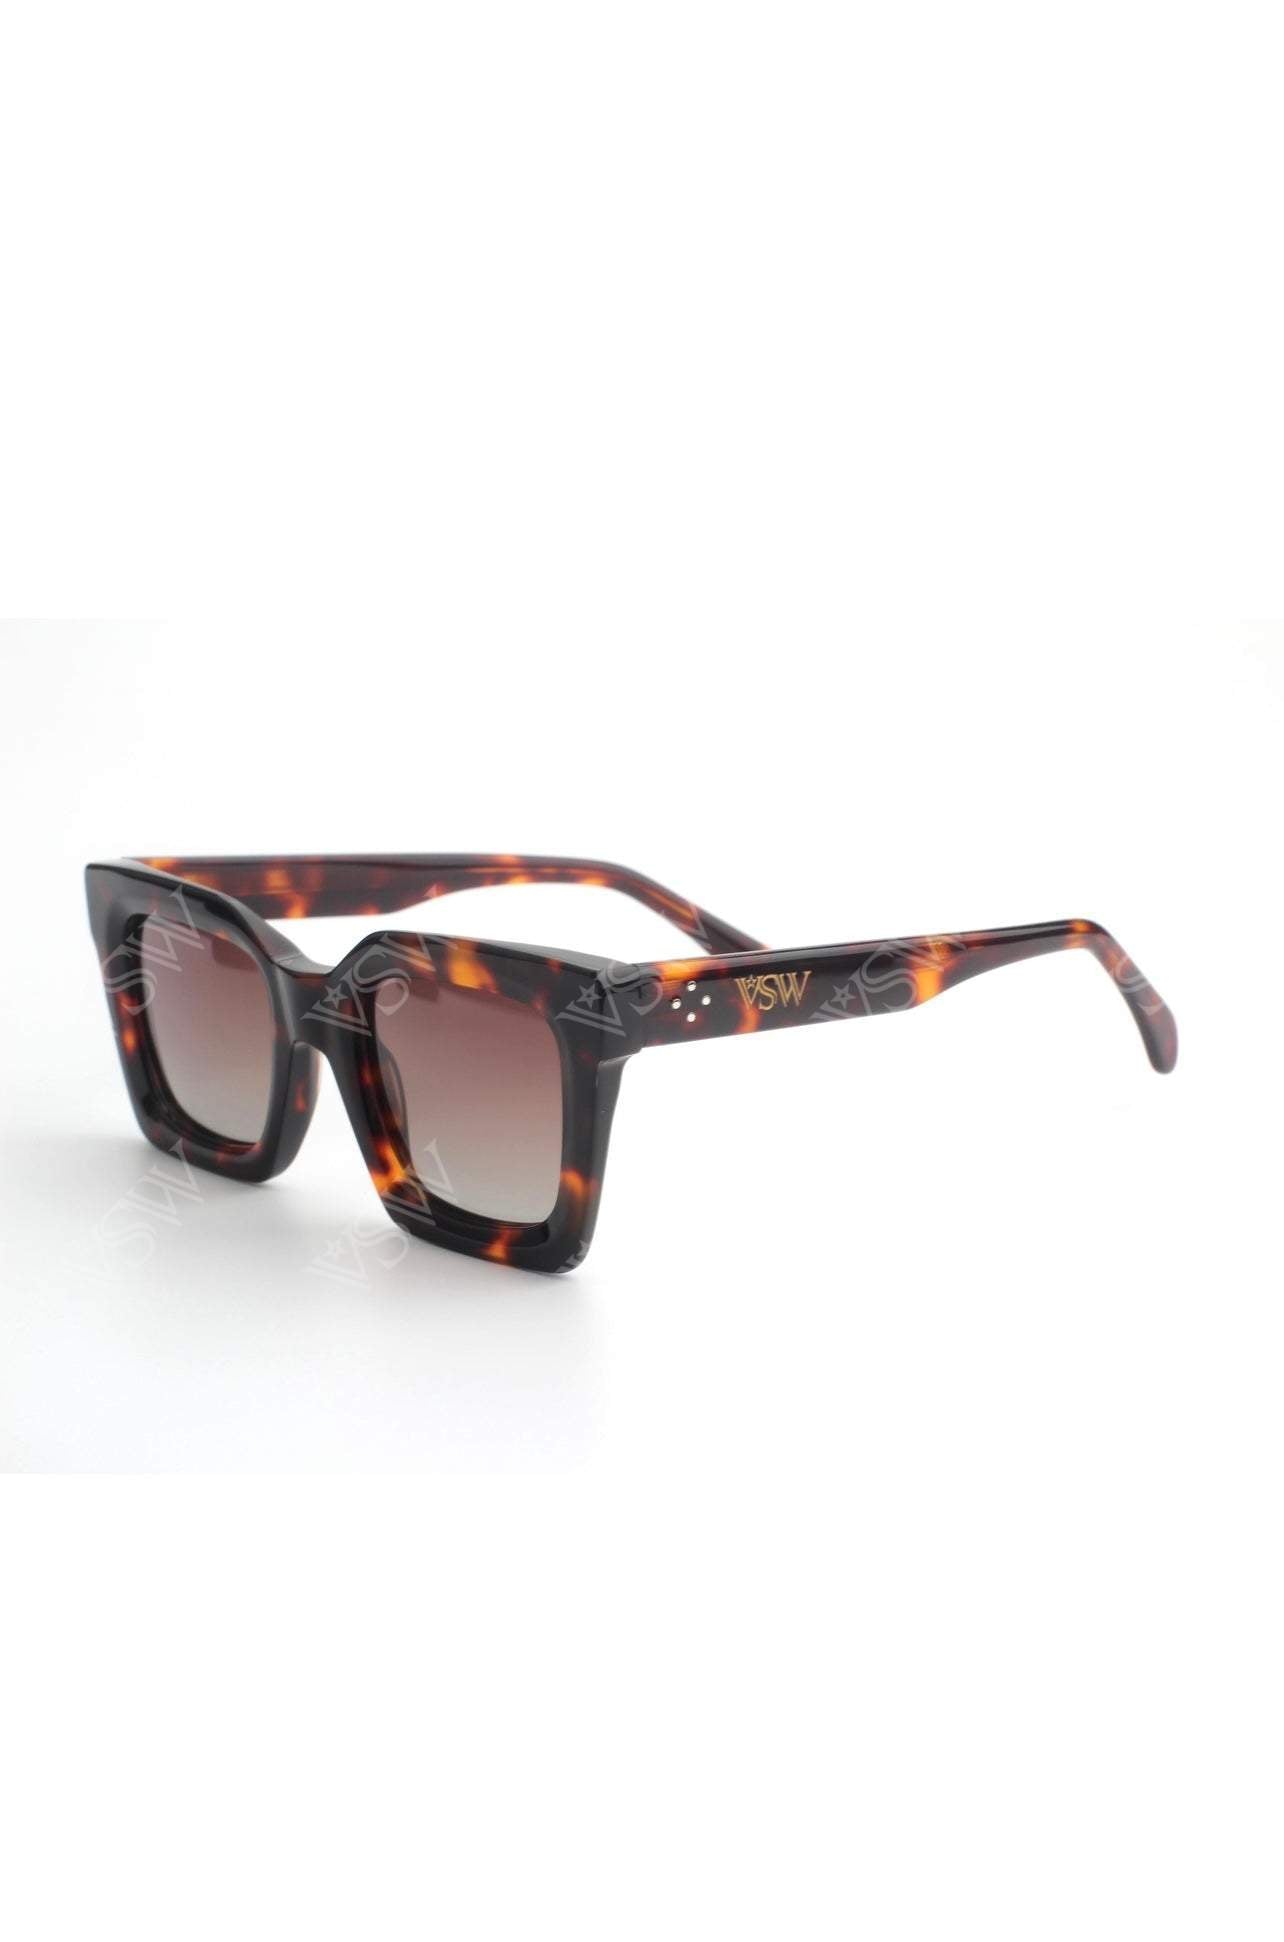 Sunglasses Mikonos - Accesorie from [store] by VSW - women accesories